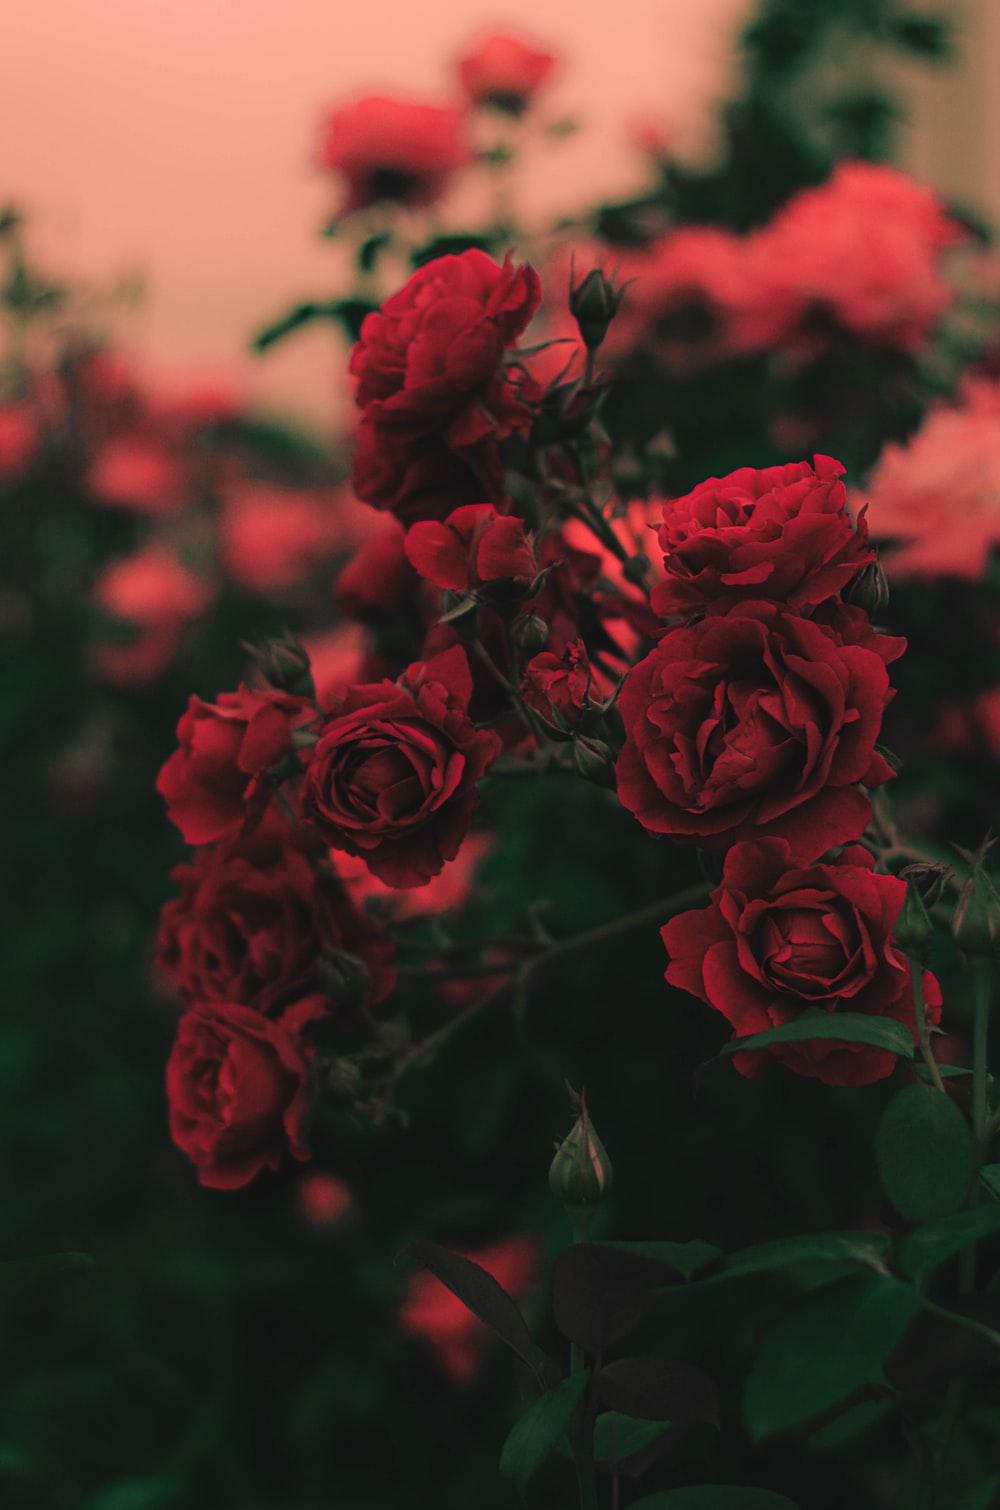 Red Flowers Picture. Download Free Image